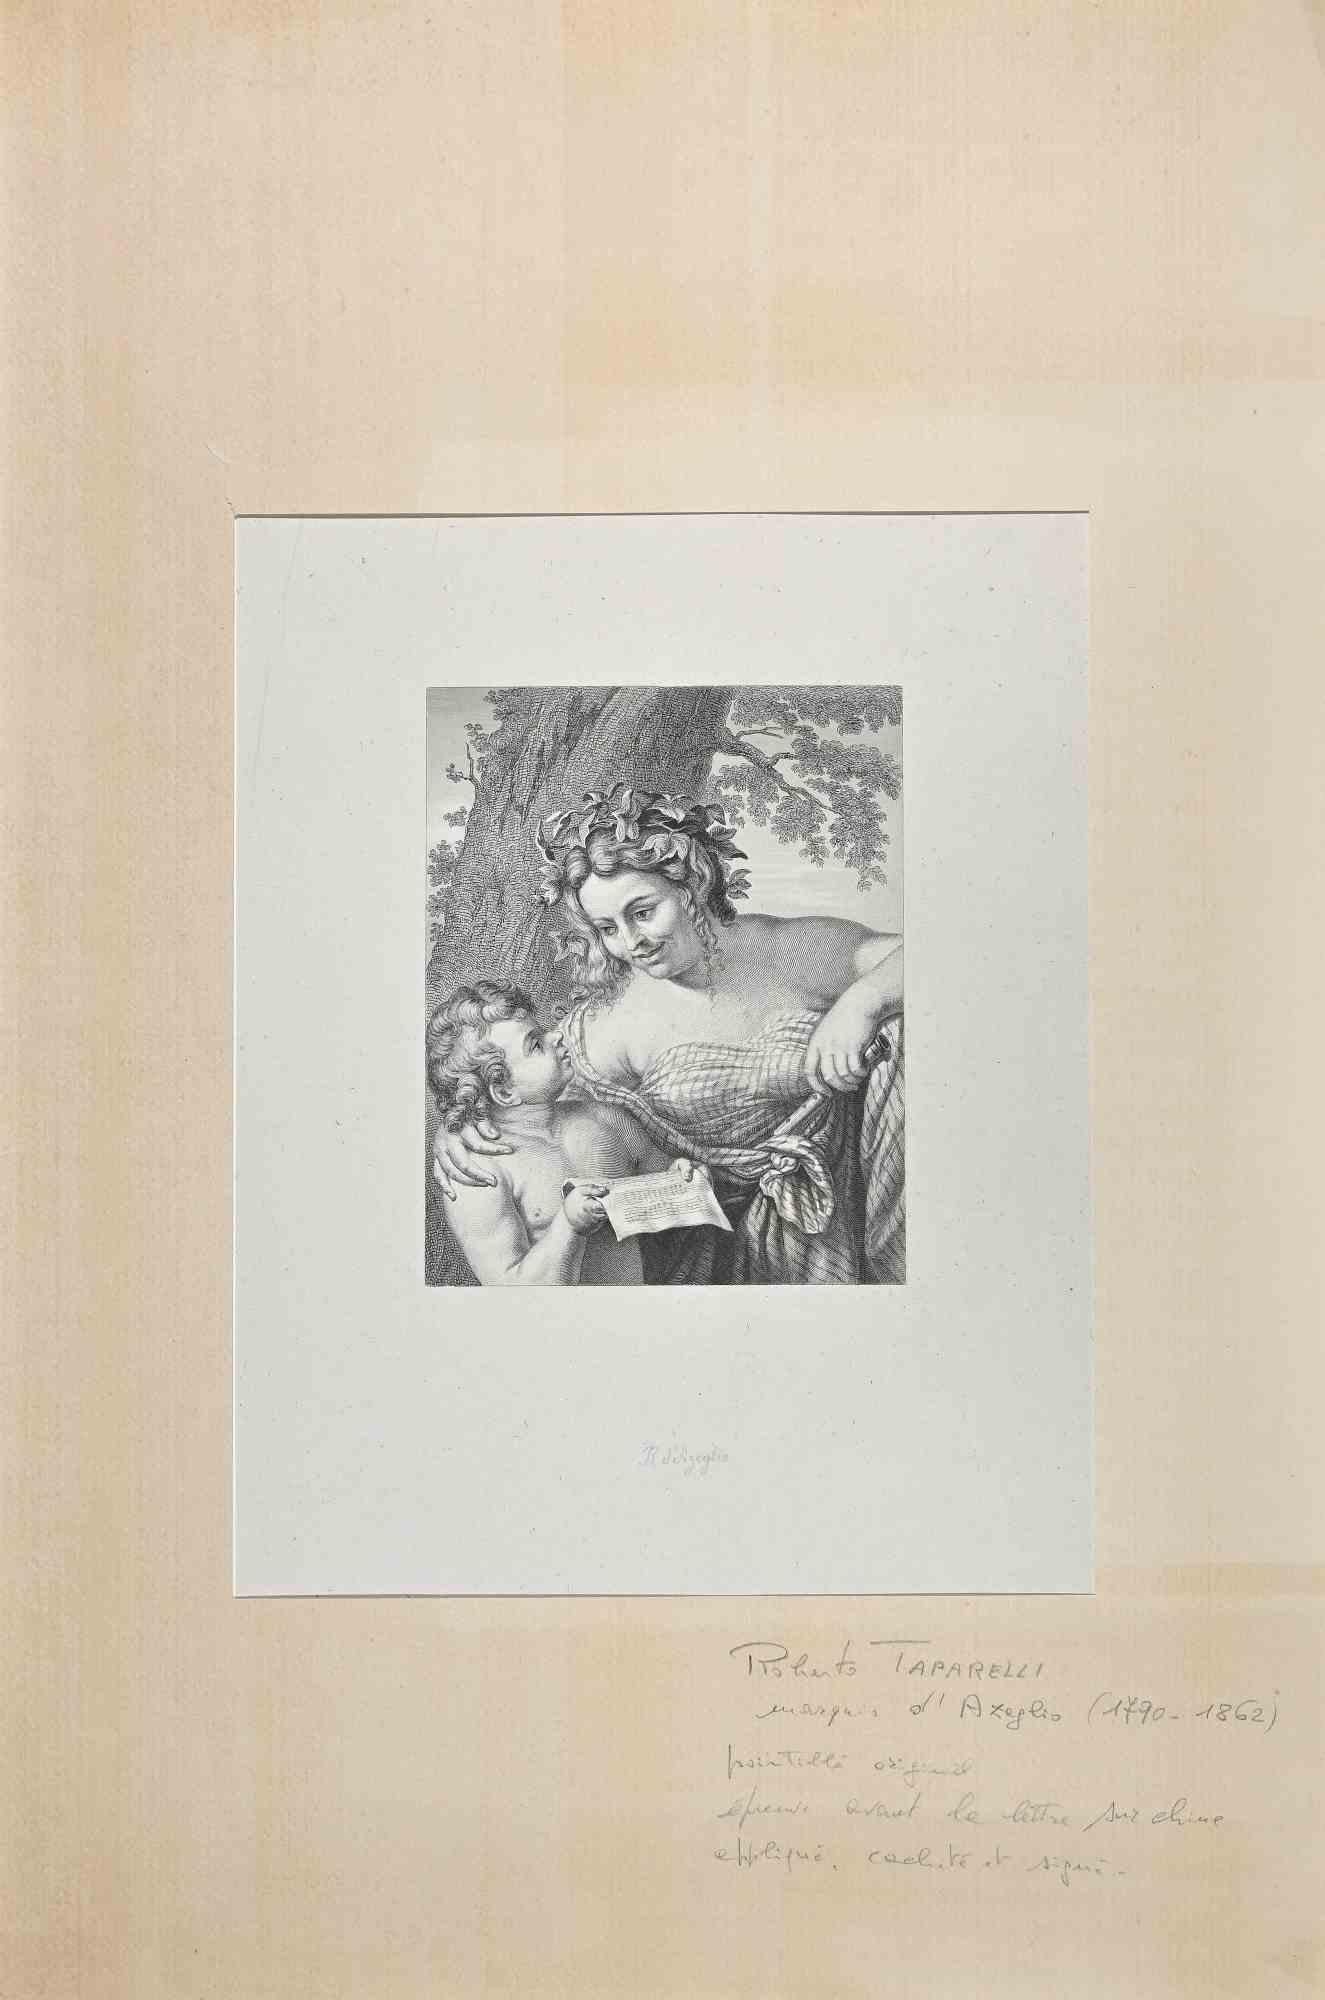 The Music Lesson is a  print realized by Roberto Taparelli(1790-1862) in the 19th Century.

Lithograph on paper.

Included a Passepartout:56 x 38 cm.

Good conditions.